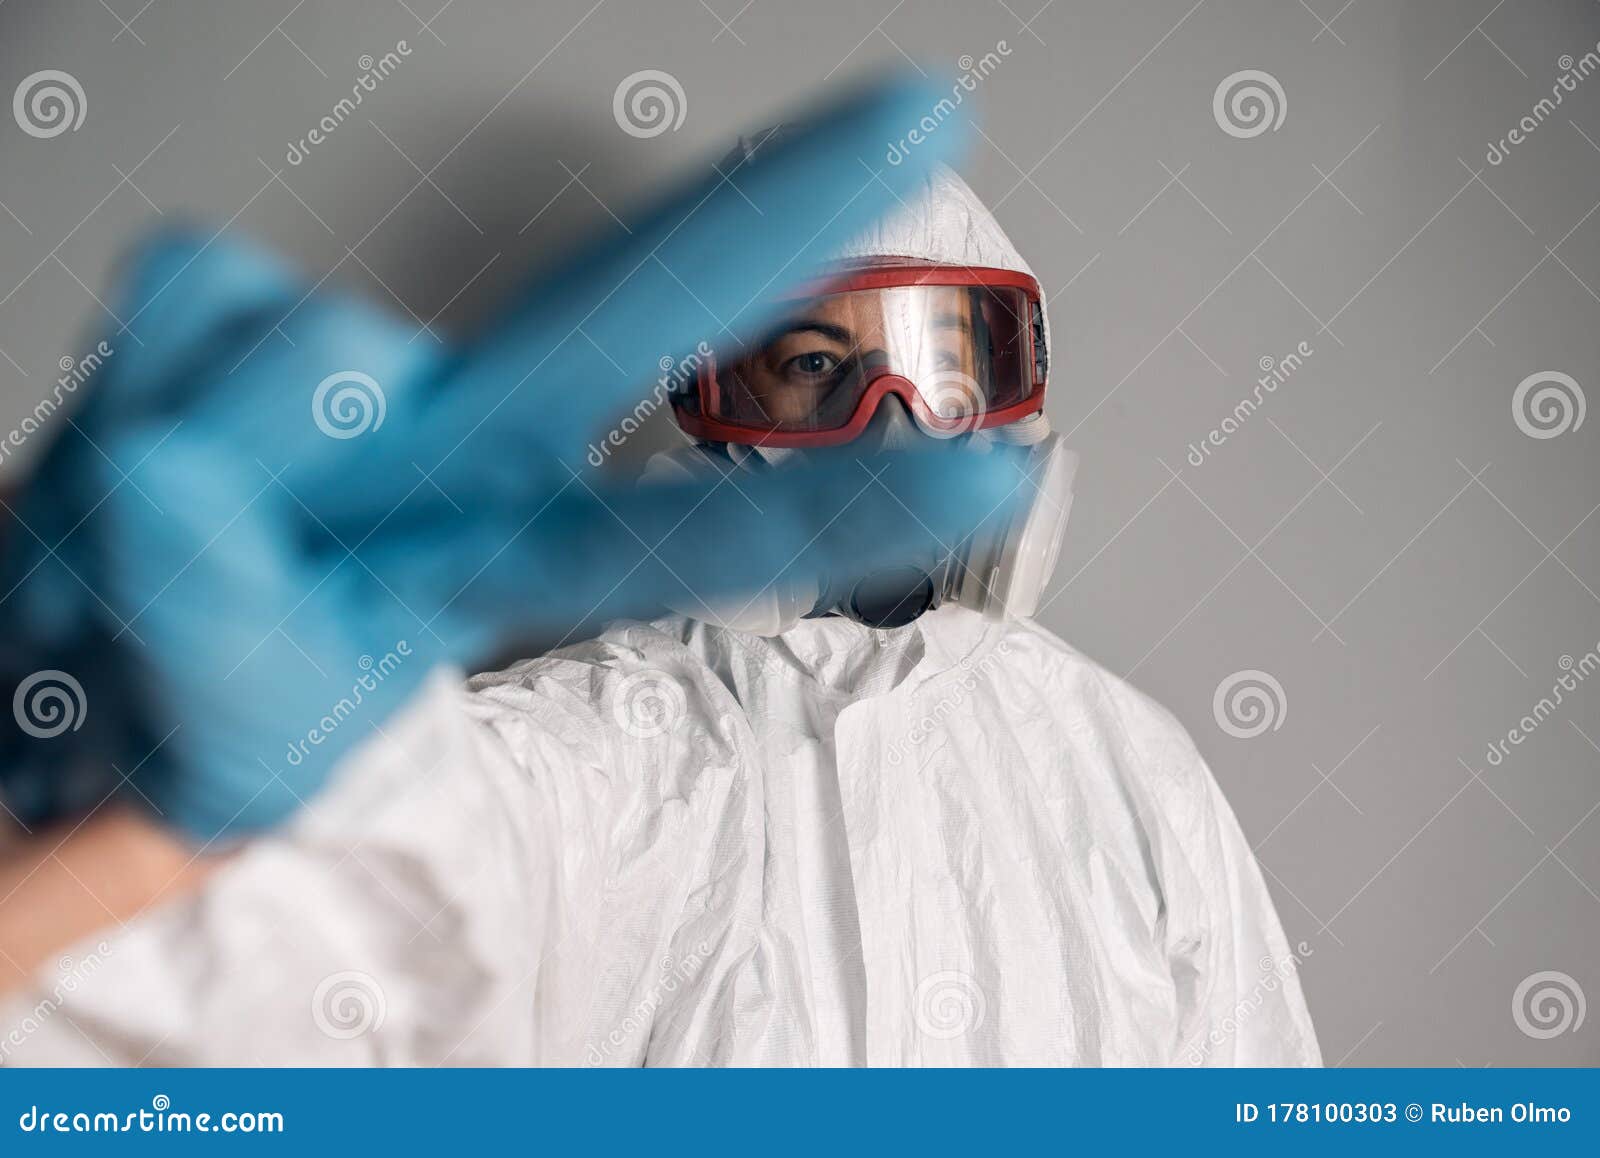 Portrait of Woman Wearing Lab Coat, Nitrile Gloves, Goggles, Face Mask ...